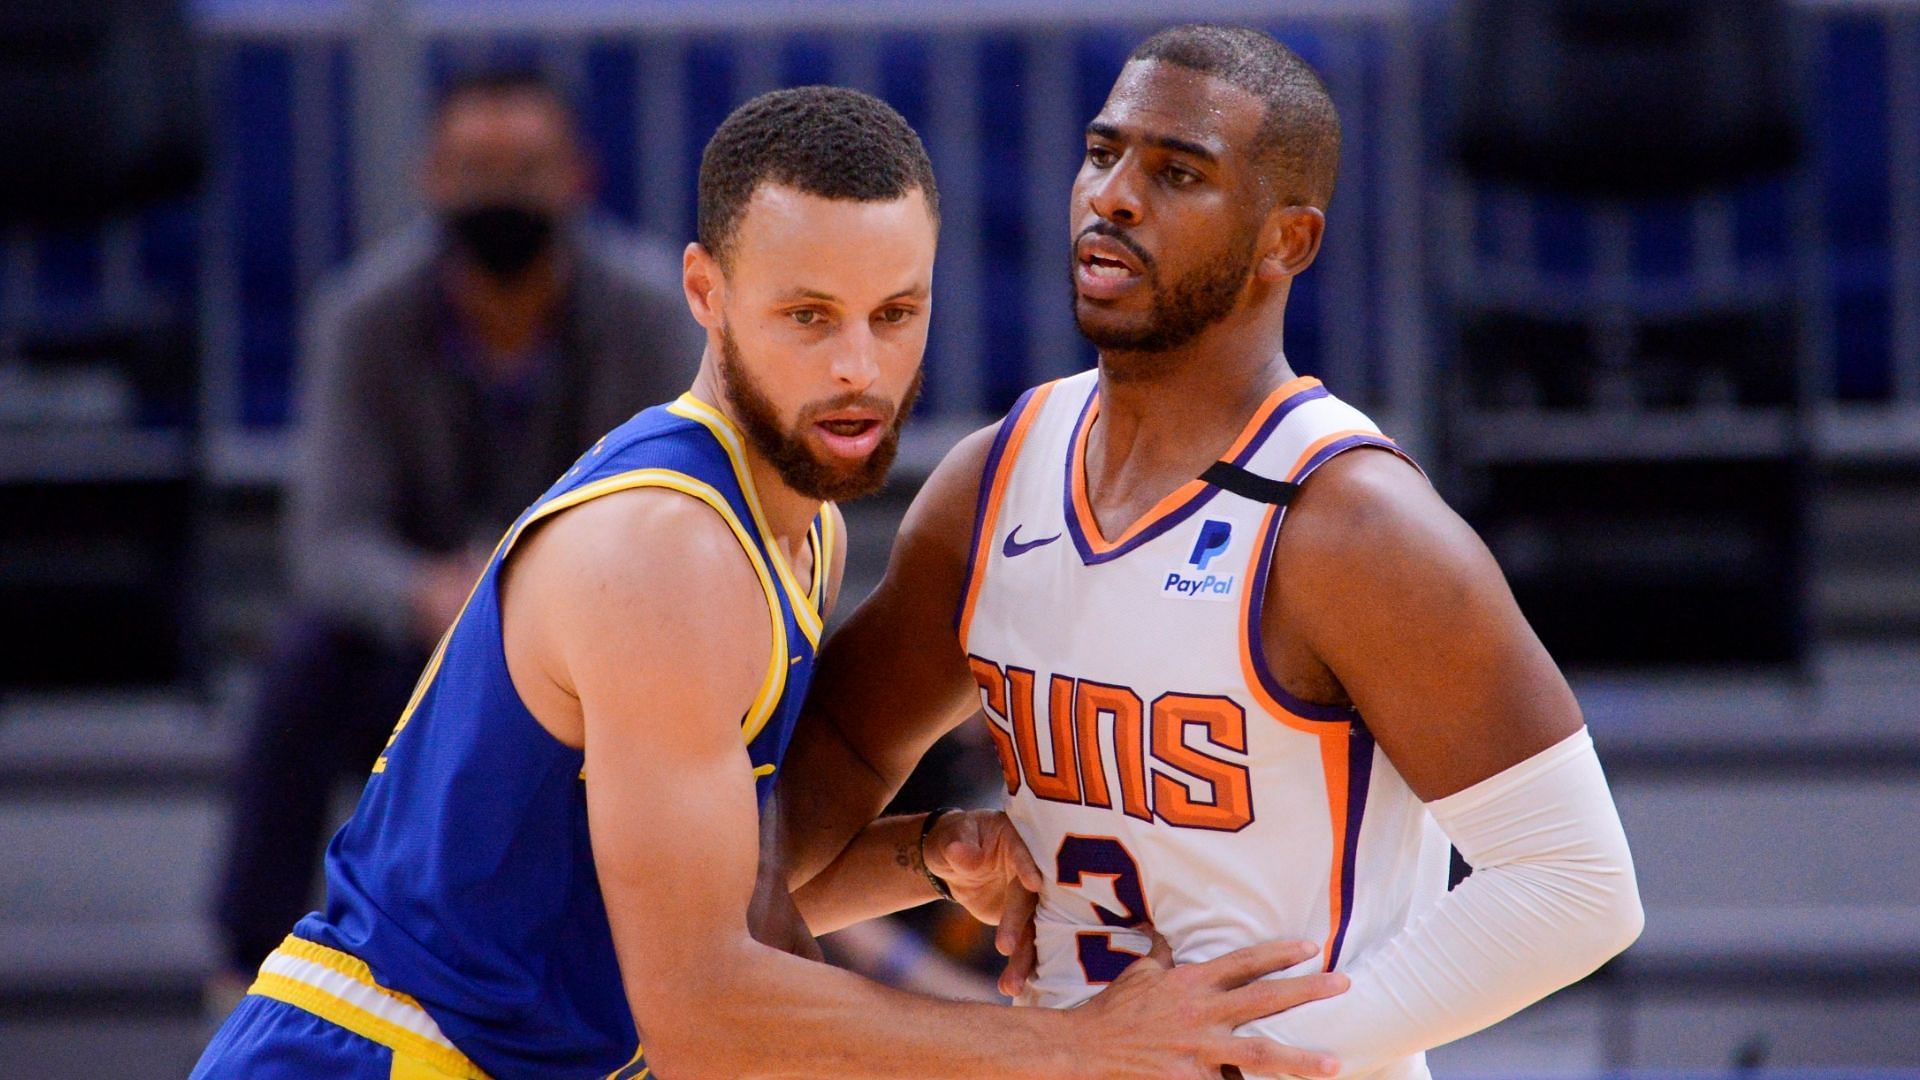 Steph Curry and Chris Paul could renew their rivalry in the playoffs this year. [Photo: Sporting News]